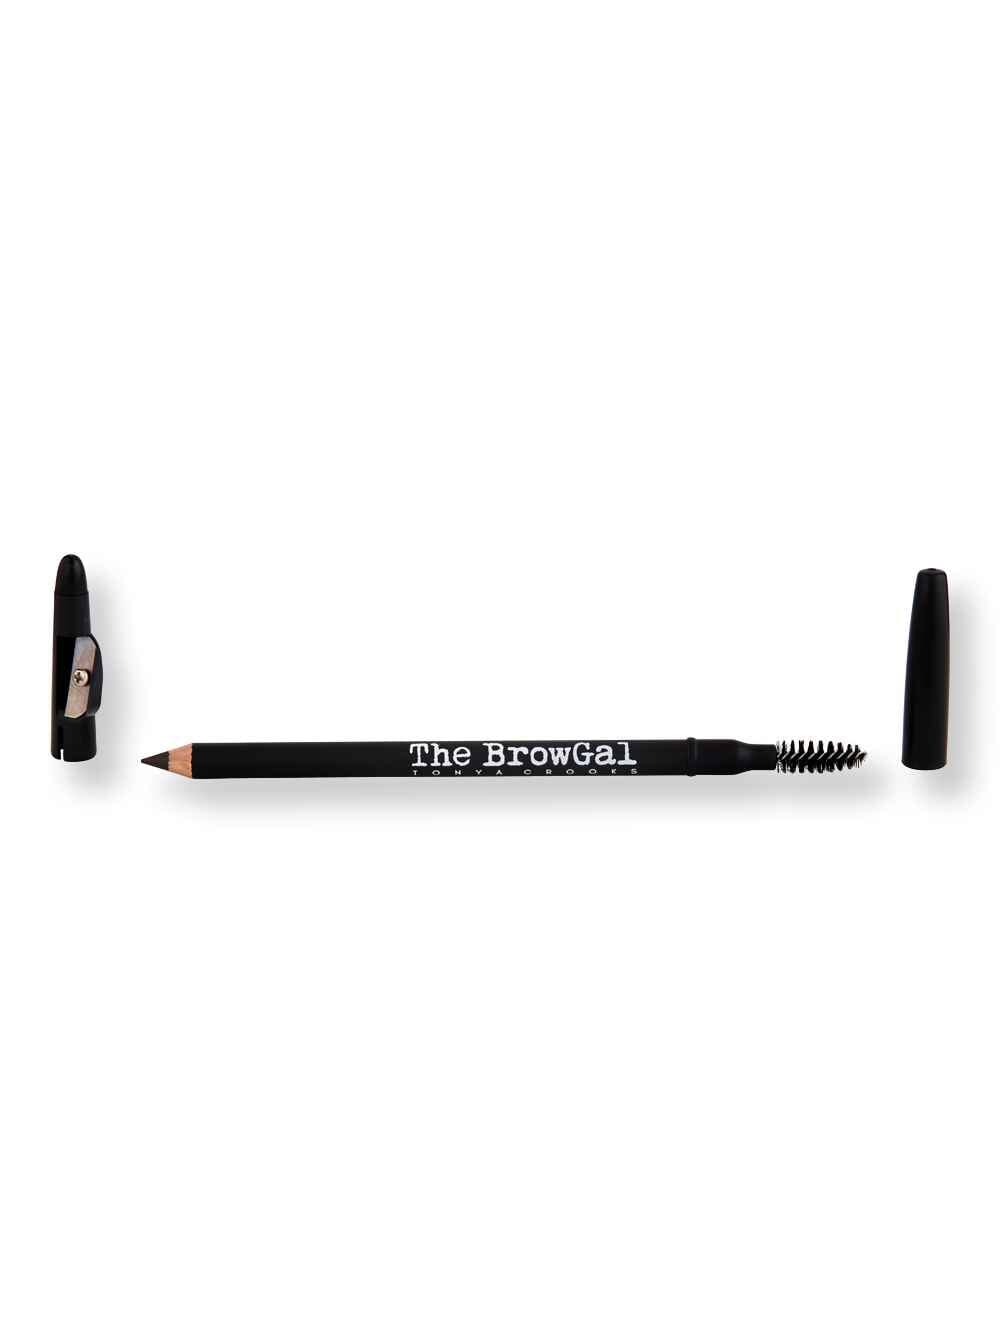 The BrowGal The BrowGal Eyebrow Pencil with Sharpener Cap + Mascara Brush 02 Espresso Eyebrows 